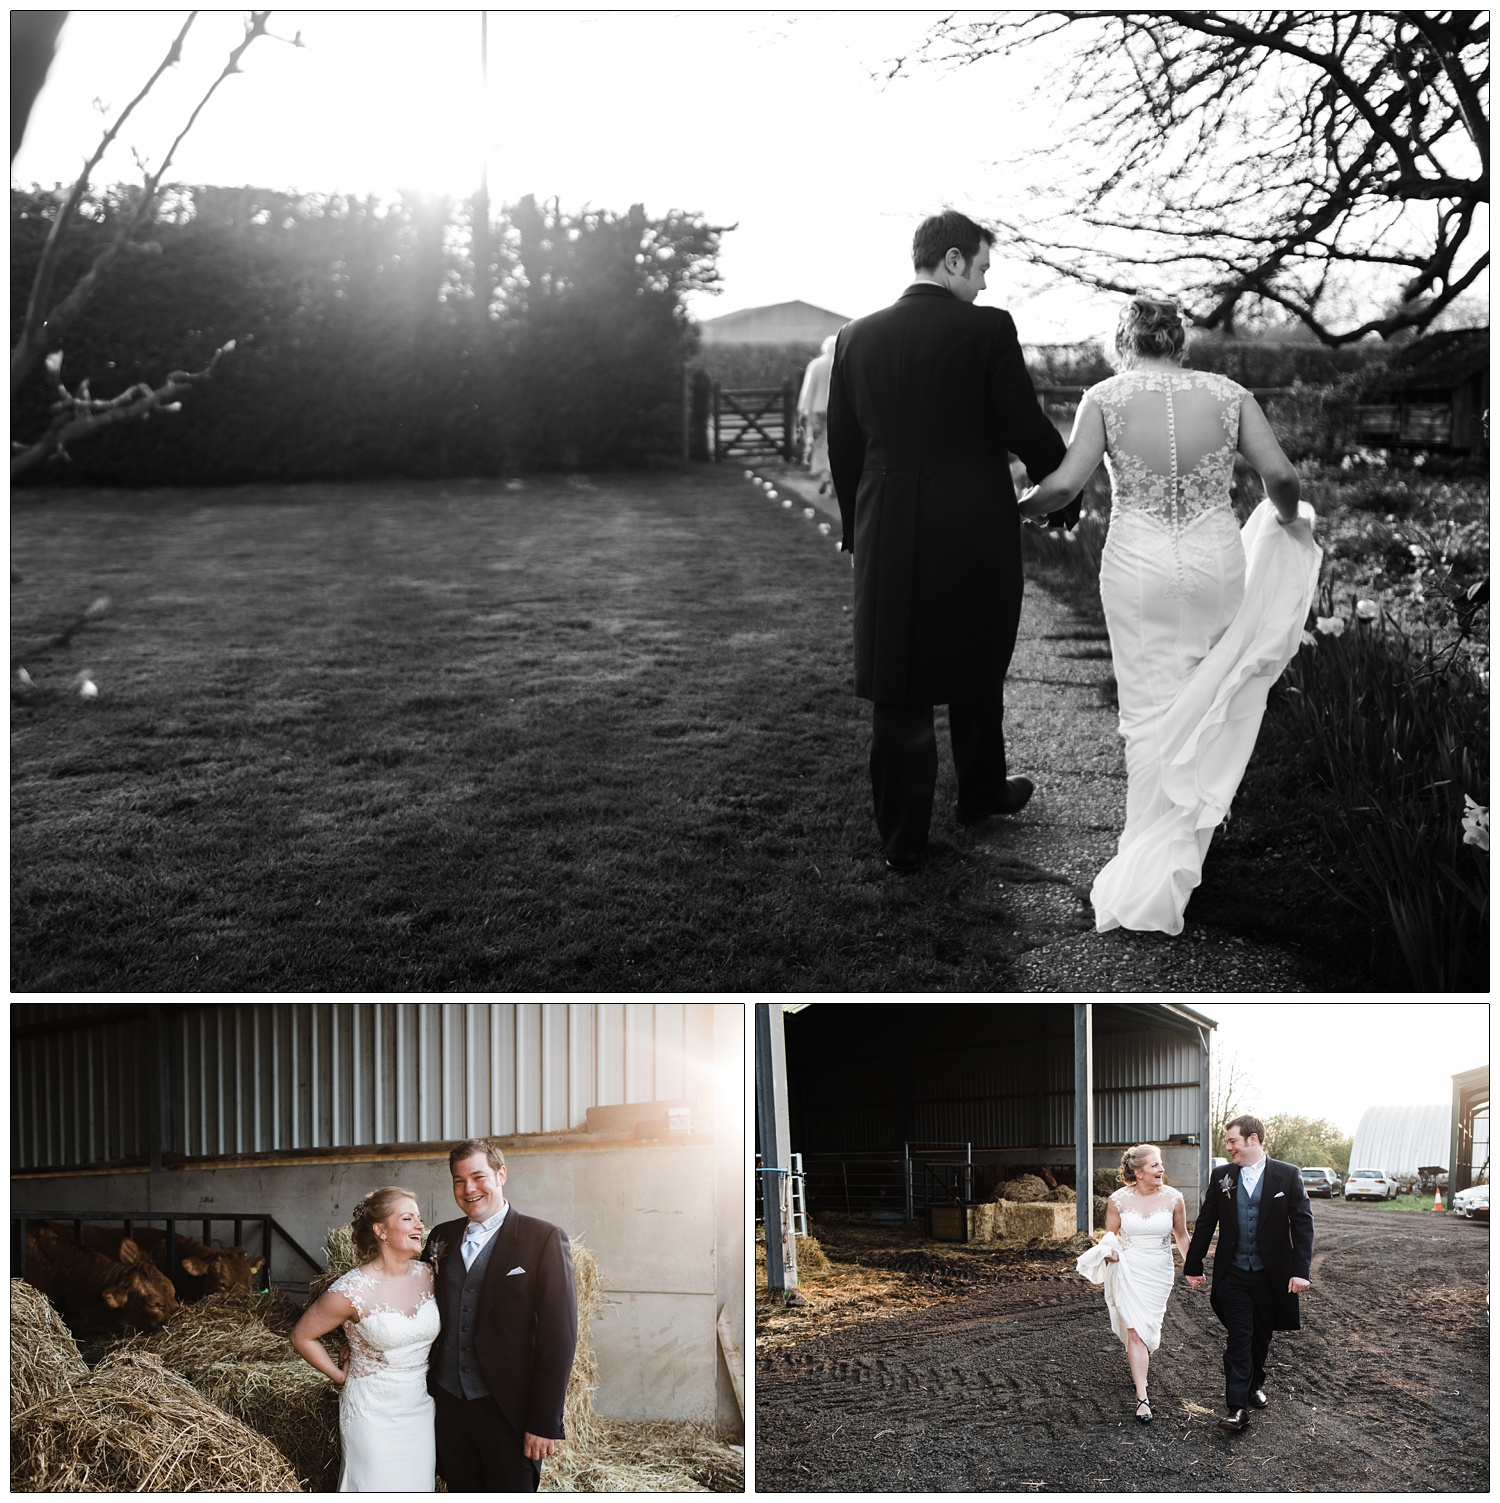 Woman in a wedding dress walks up the path with a man in a morning suit on their wedding day. The sun is low in the sky and there are daffodils in the garden. Then they have a picture taken with the cows in the barn.